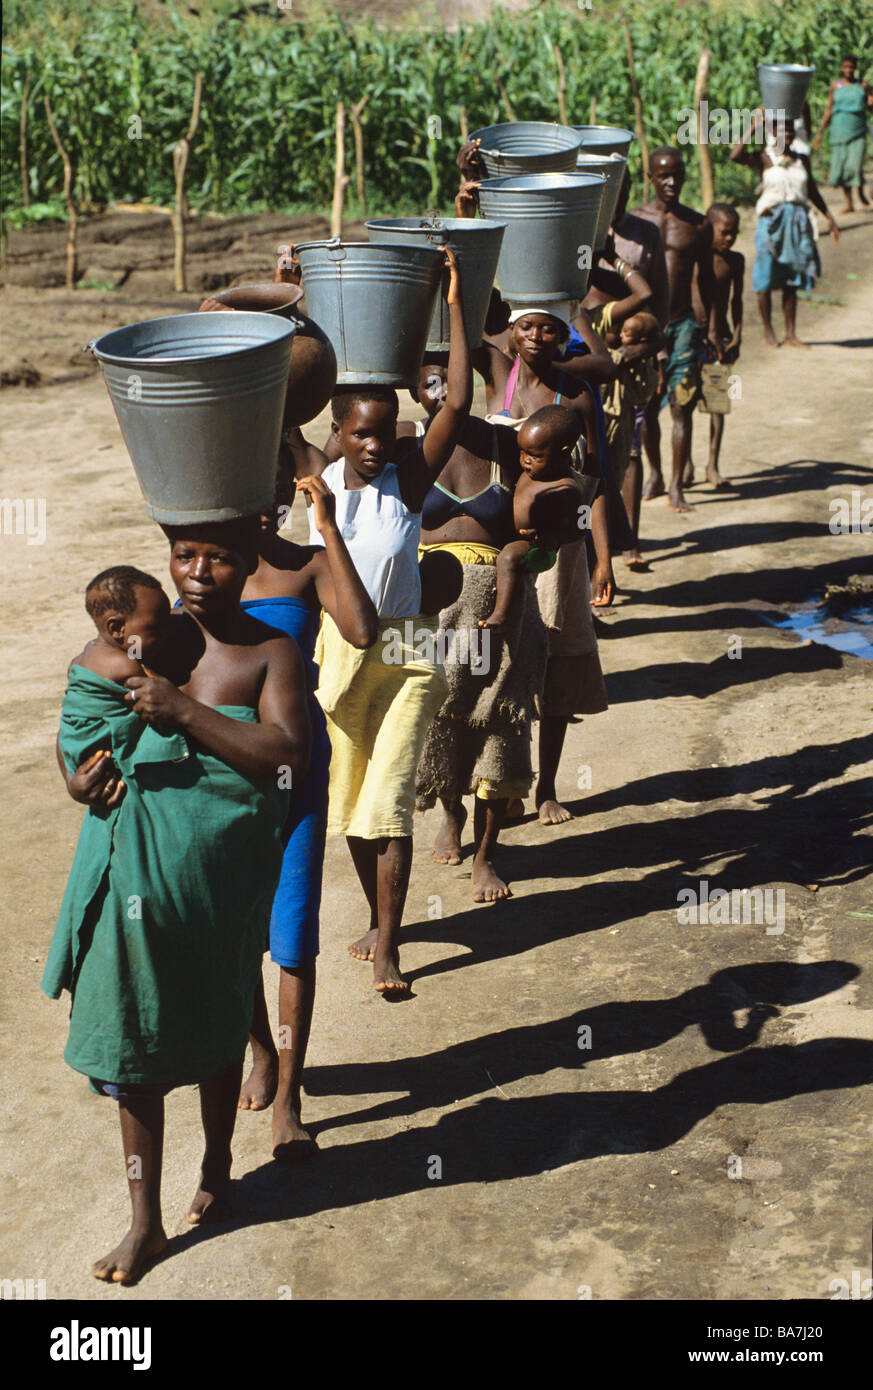 A line of women some with babies carry heavy buckets and ceramic pots on their heads after collecting water at a well Malawi Stock Photo